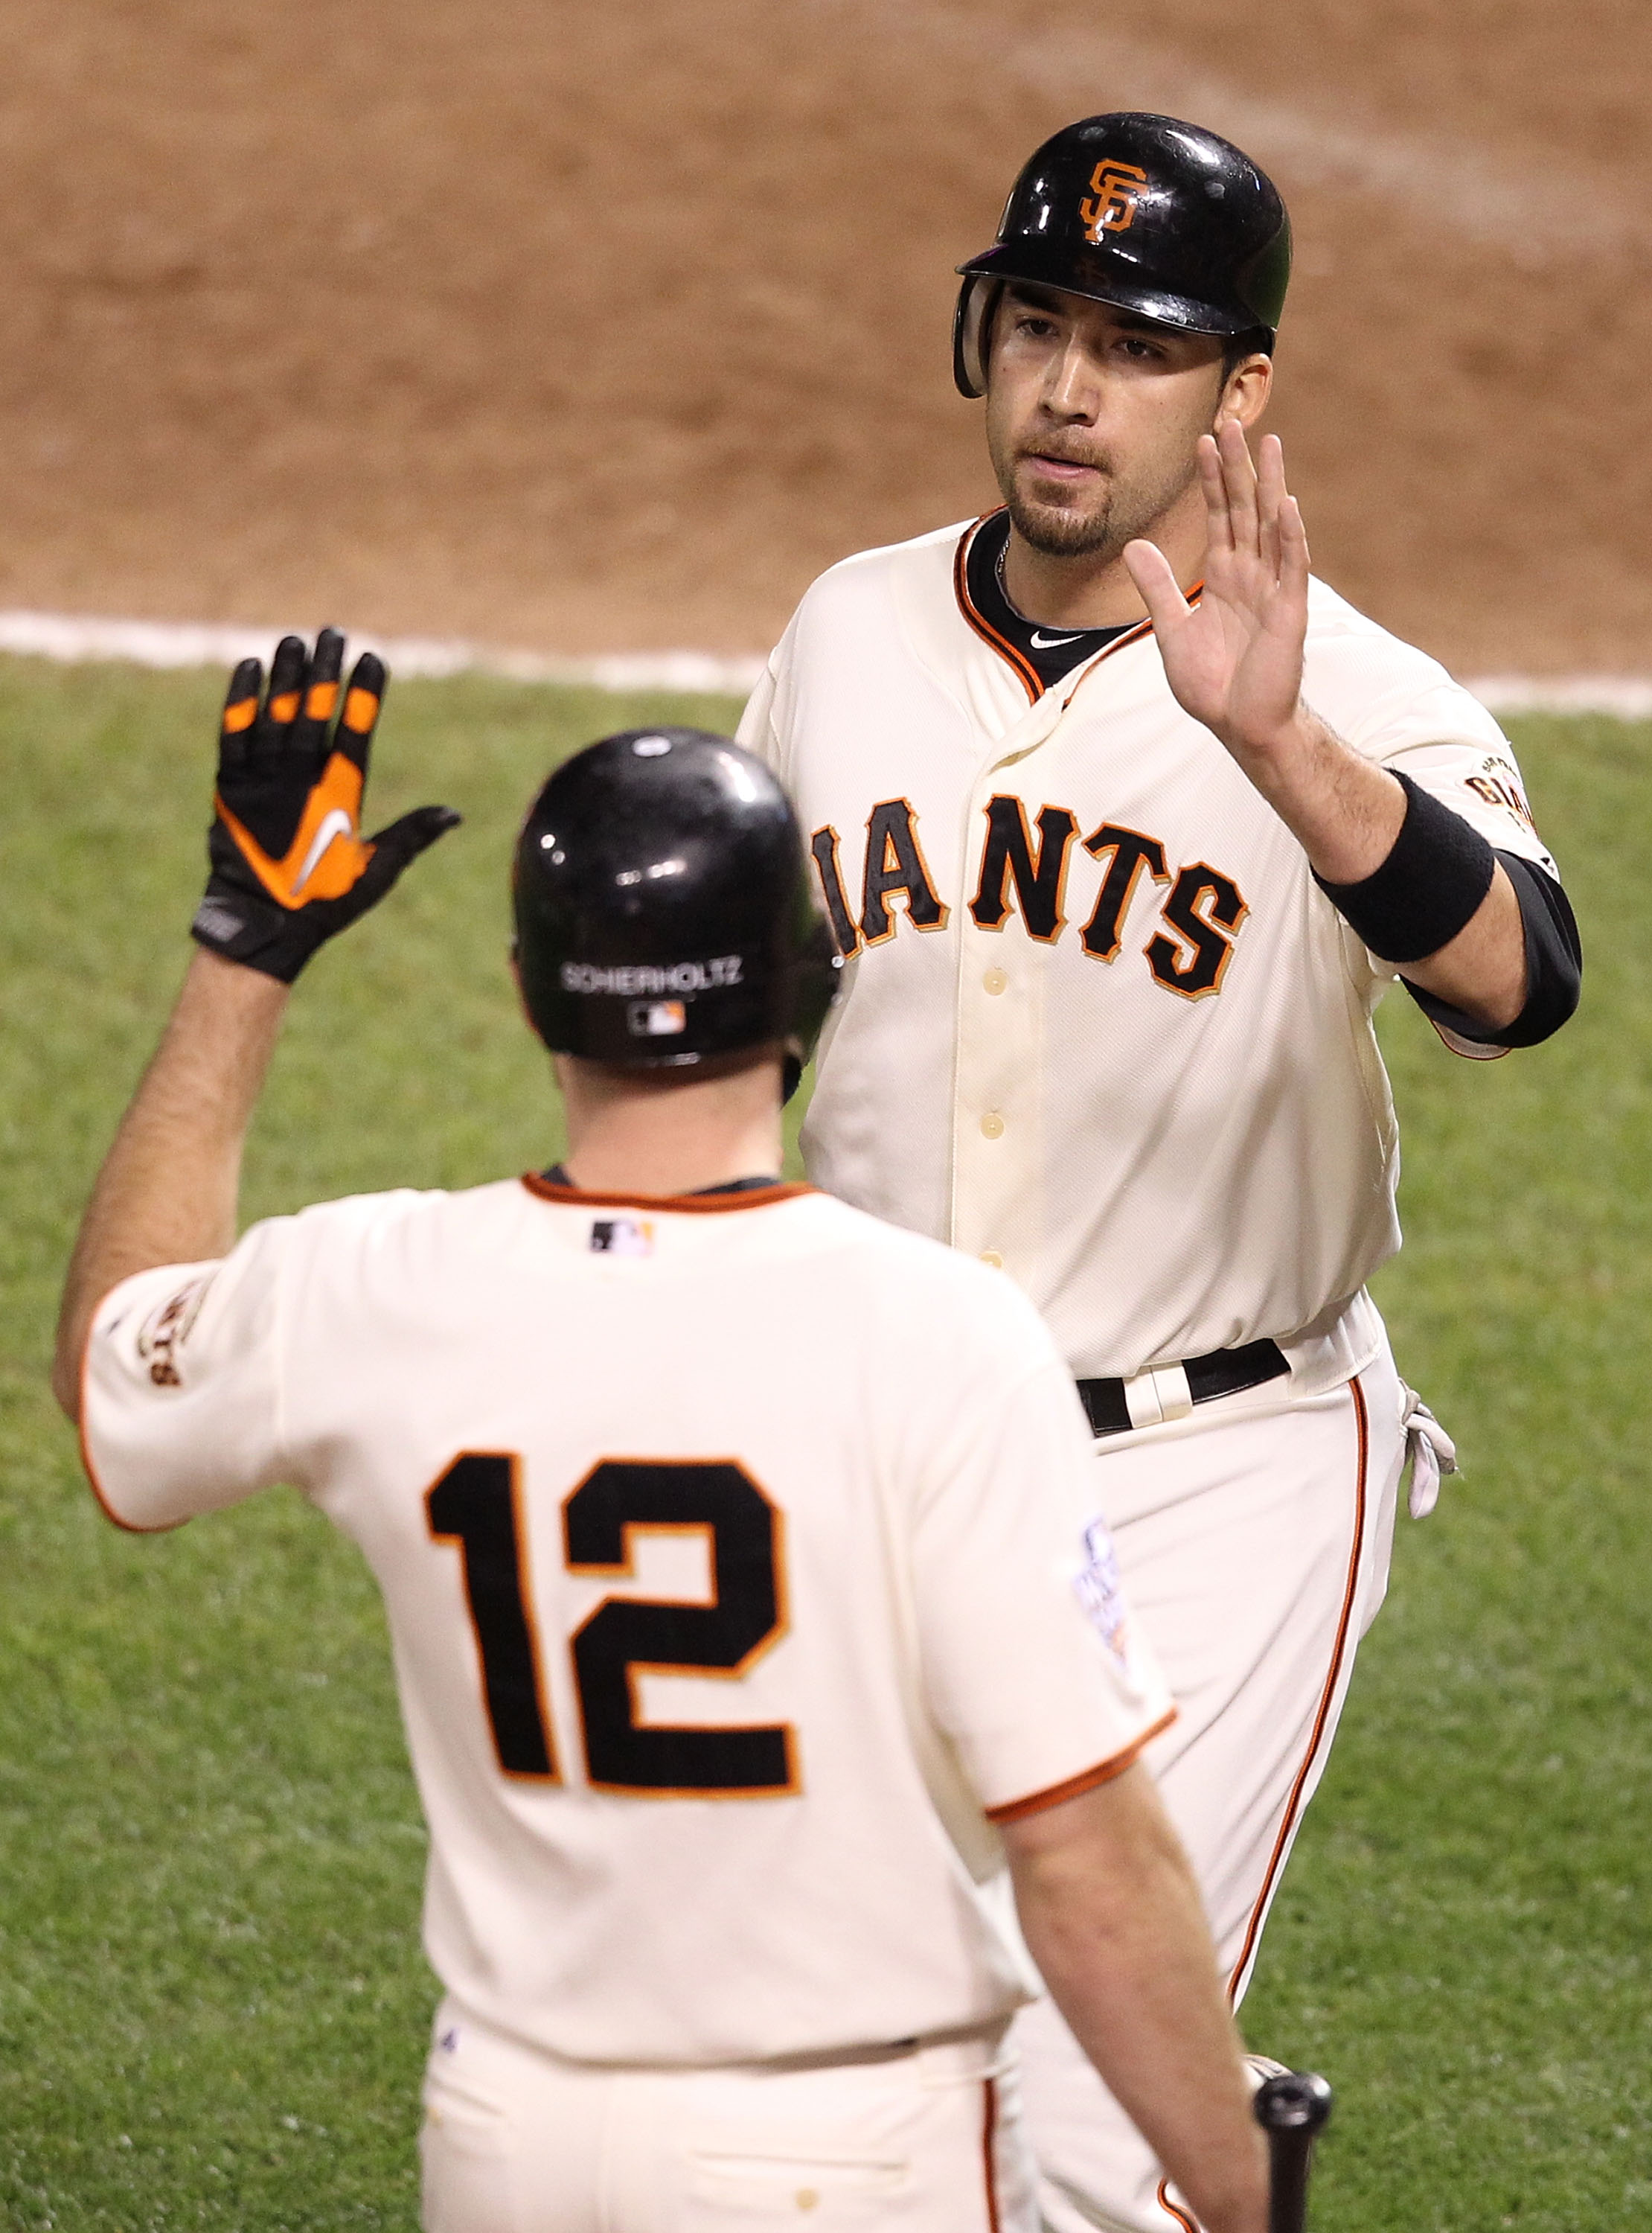 SAN FRANCISCO - OCTOBER 27:  Travis Ishikawa #10 of the San Francisco Giants celebrates with Nate Schierholtz #12 after scoring in the eighth inning against the Texas Rangers in Game One of the 2010 MLB World Series at AT&T Park on October 27, 2010 in San